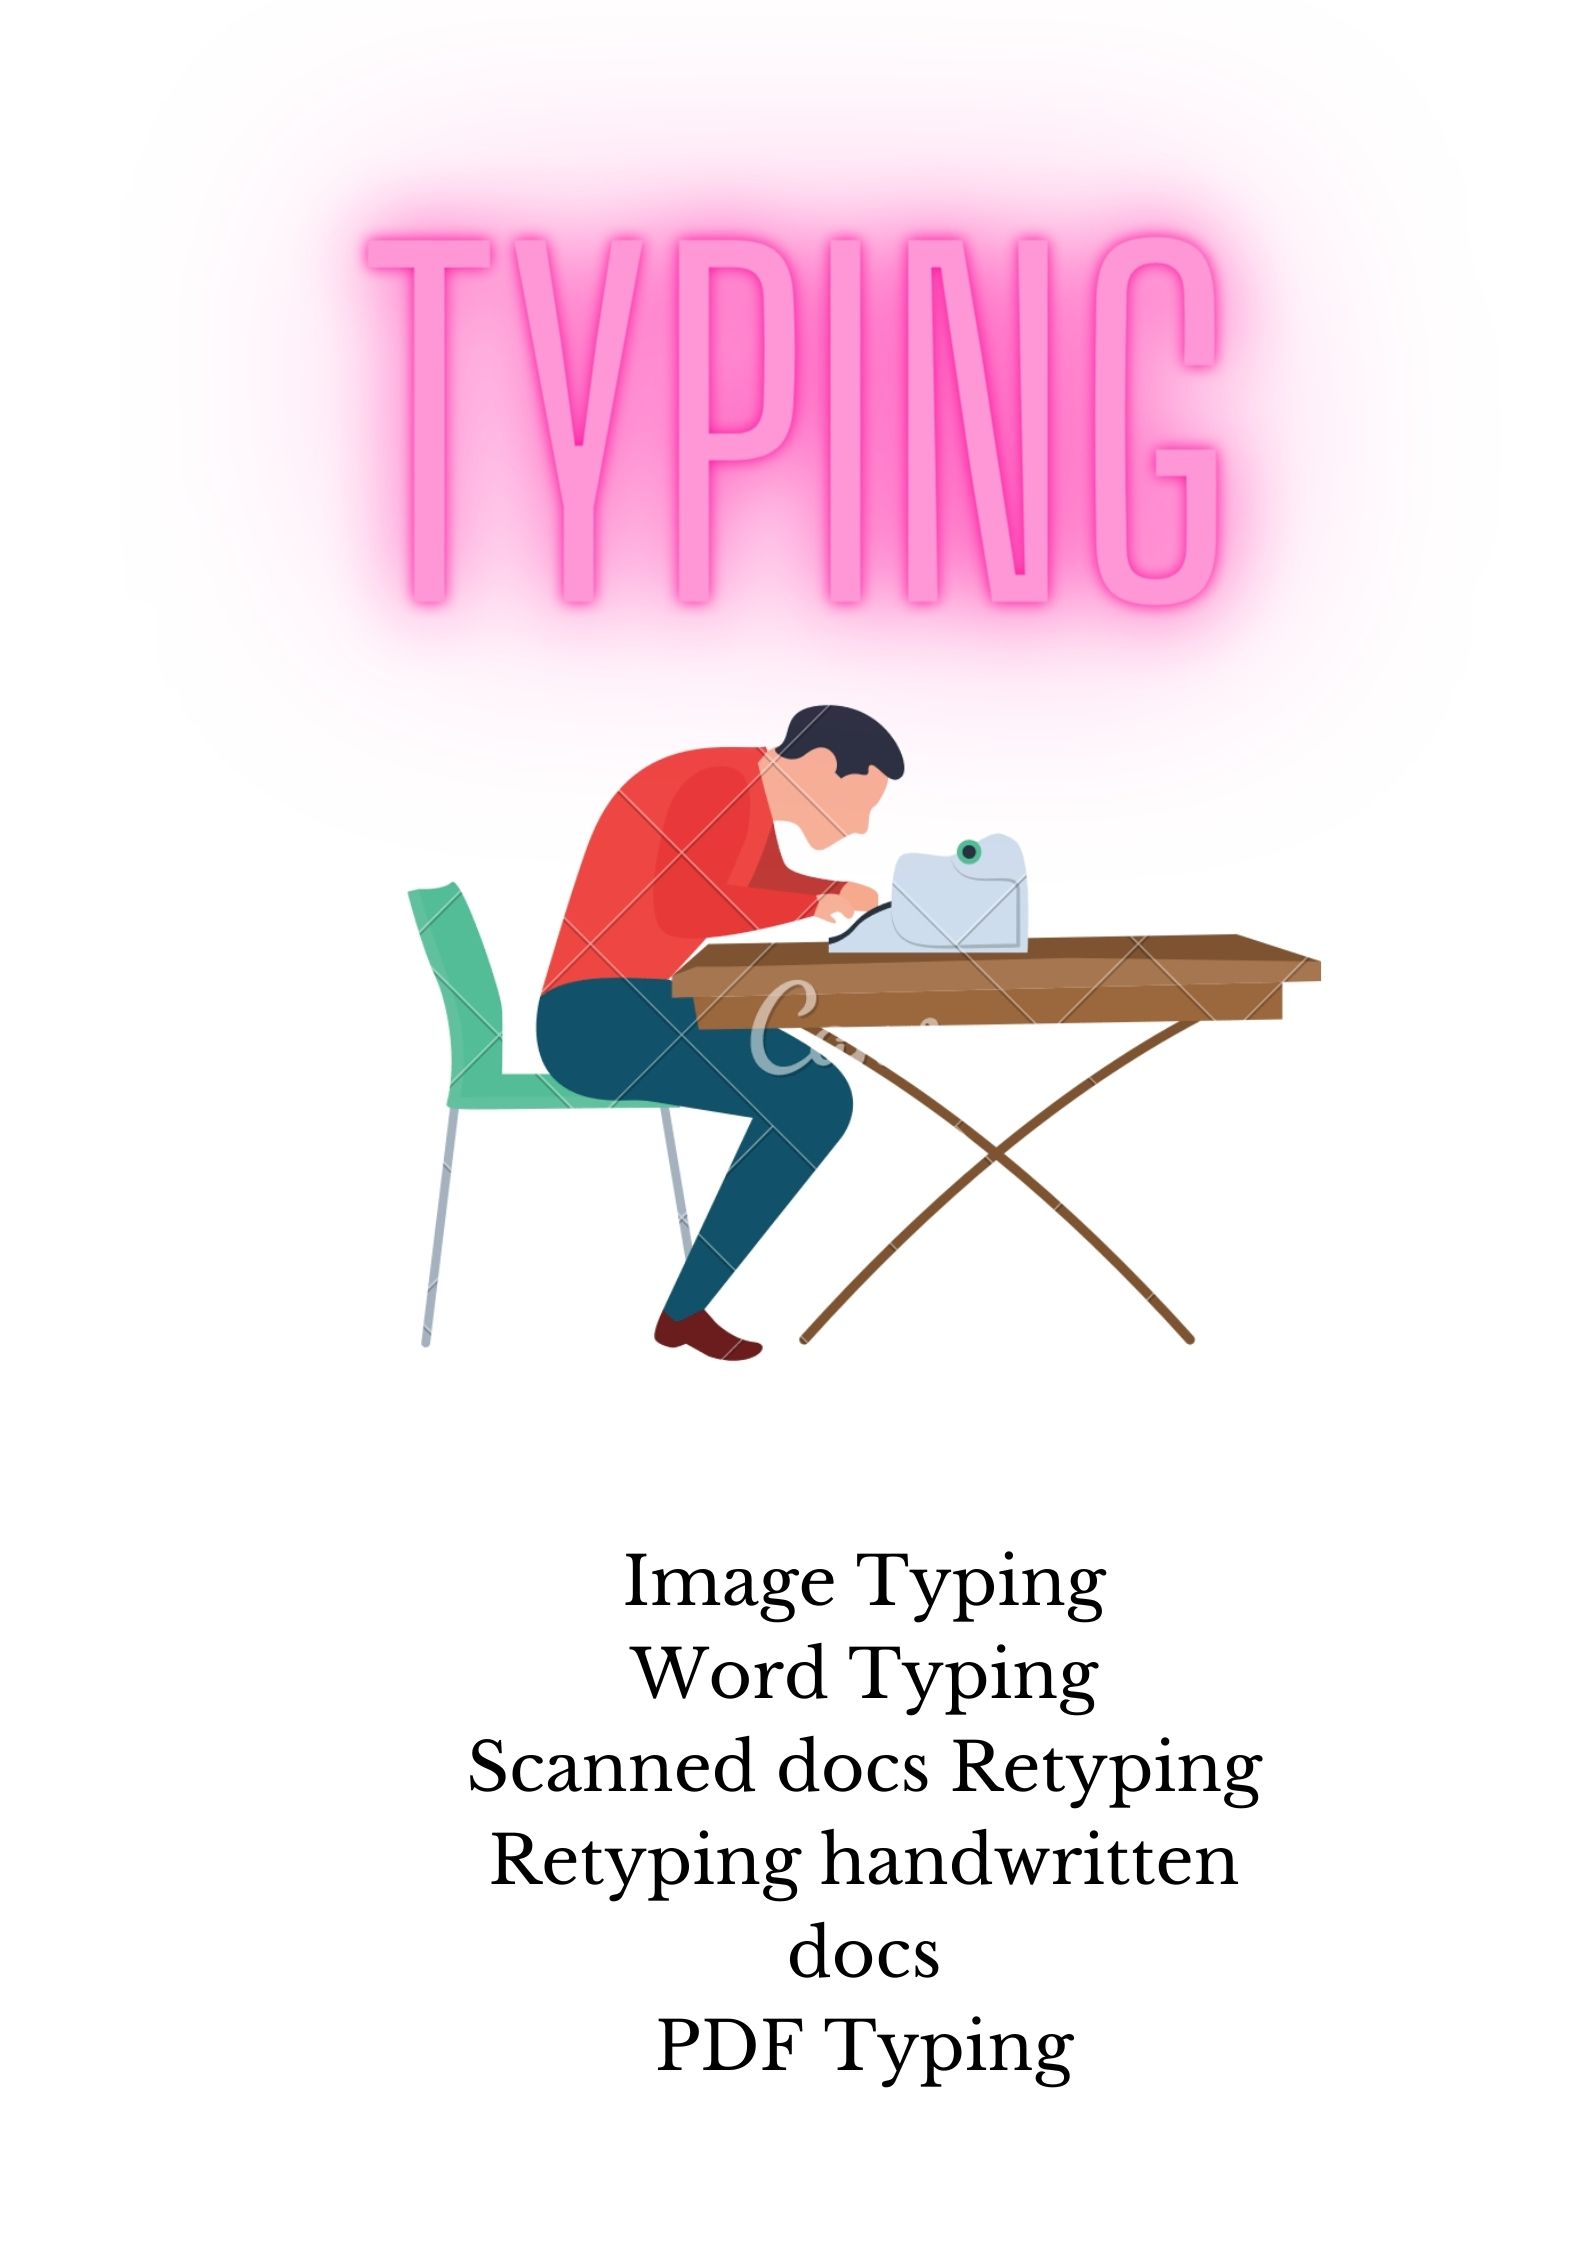 103895I’ll do professional typing of scanned documents, image typing handwritten docs